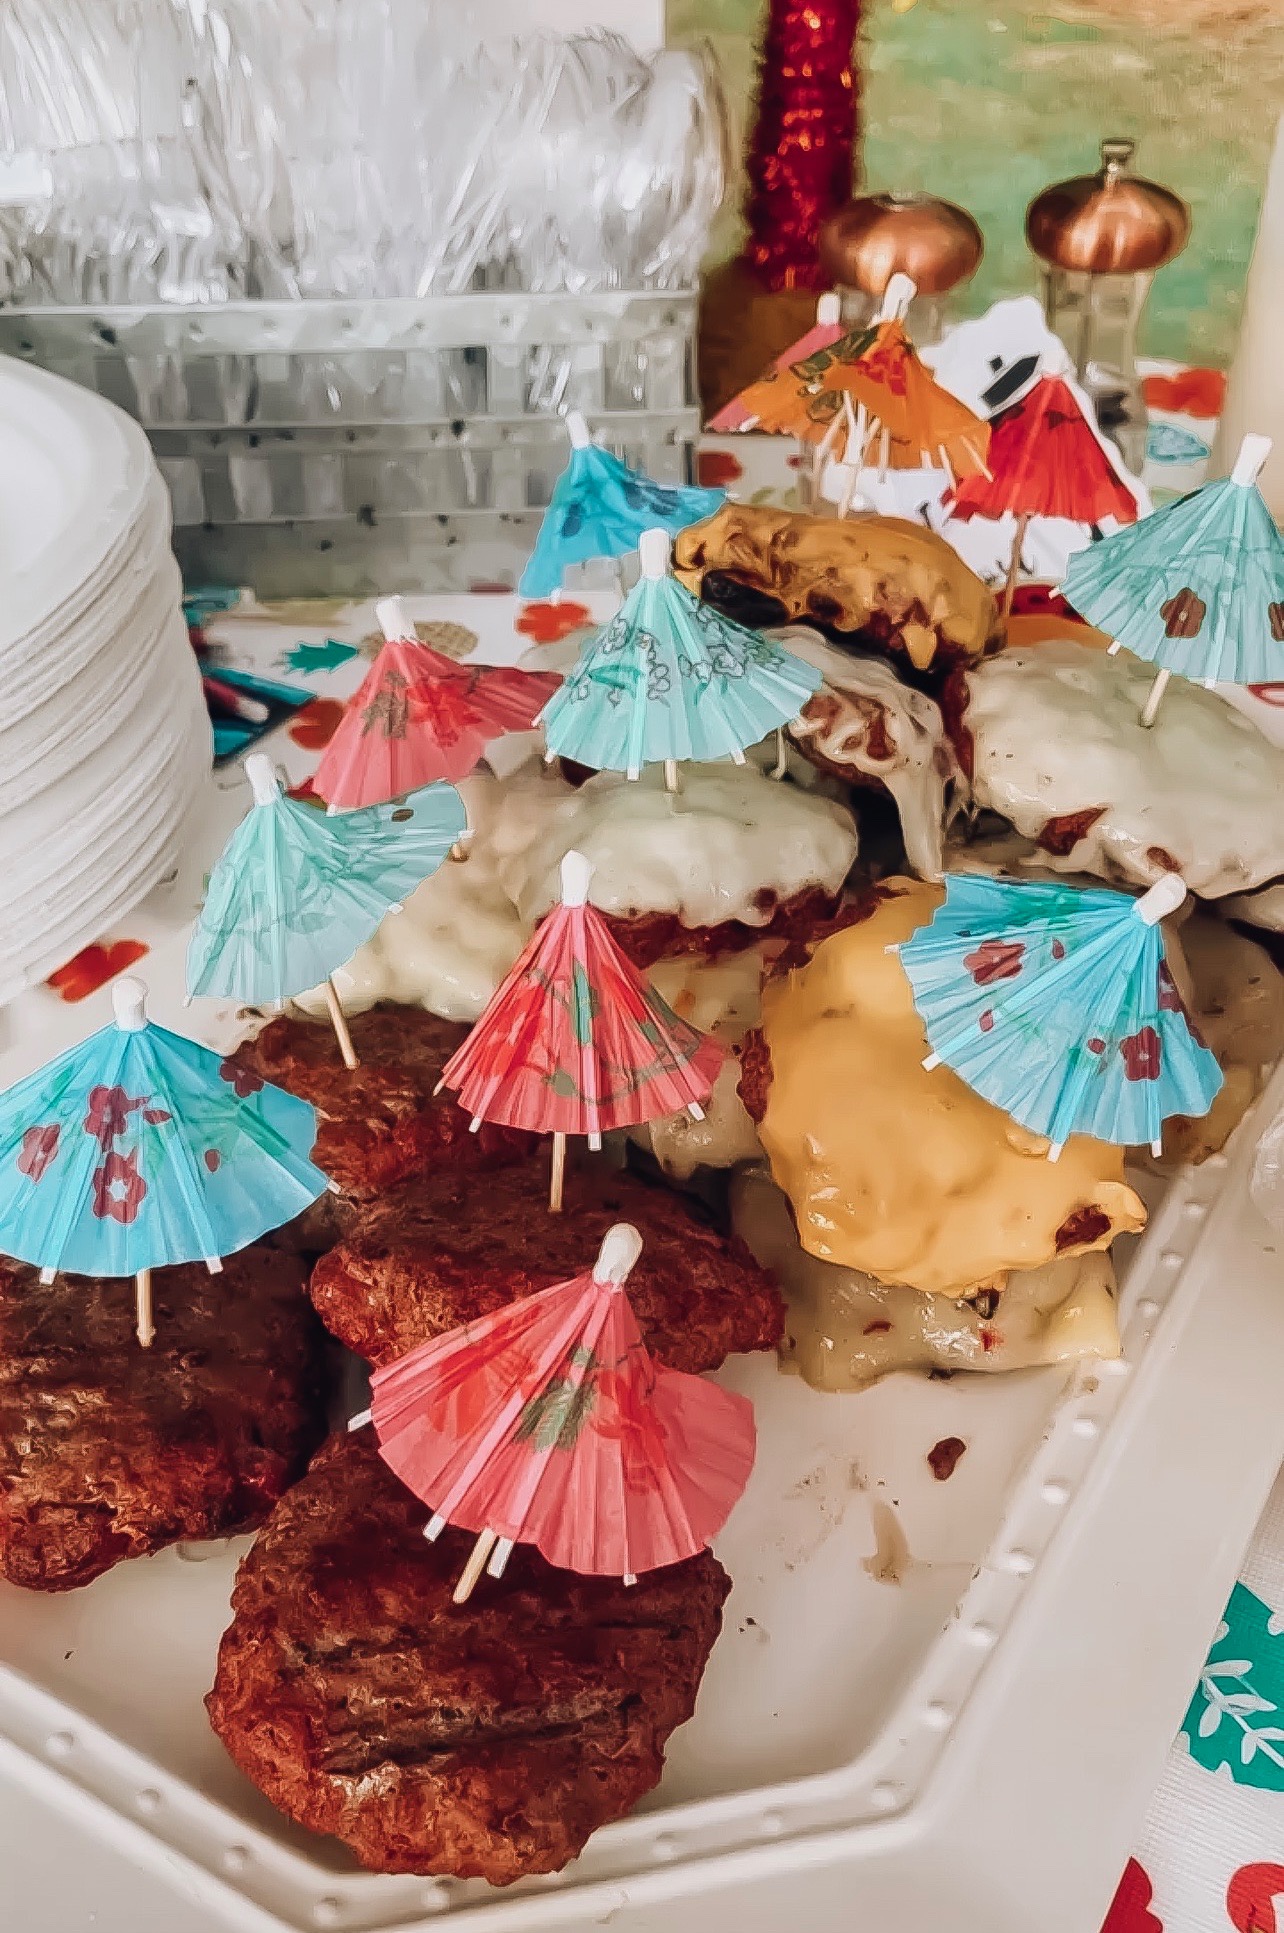 Jimmy Buffet Party + Summer Cookout Sides - Something Delightful Blog #summerparty #jimmybuffettparty #cookoutsides #july4thfood